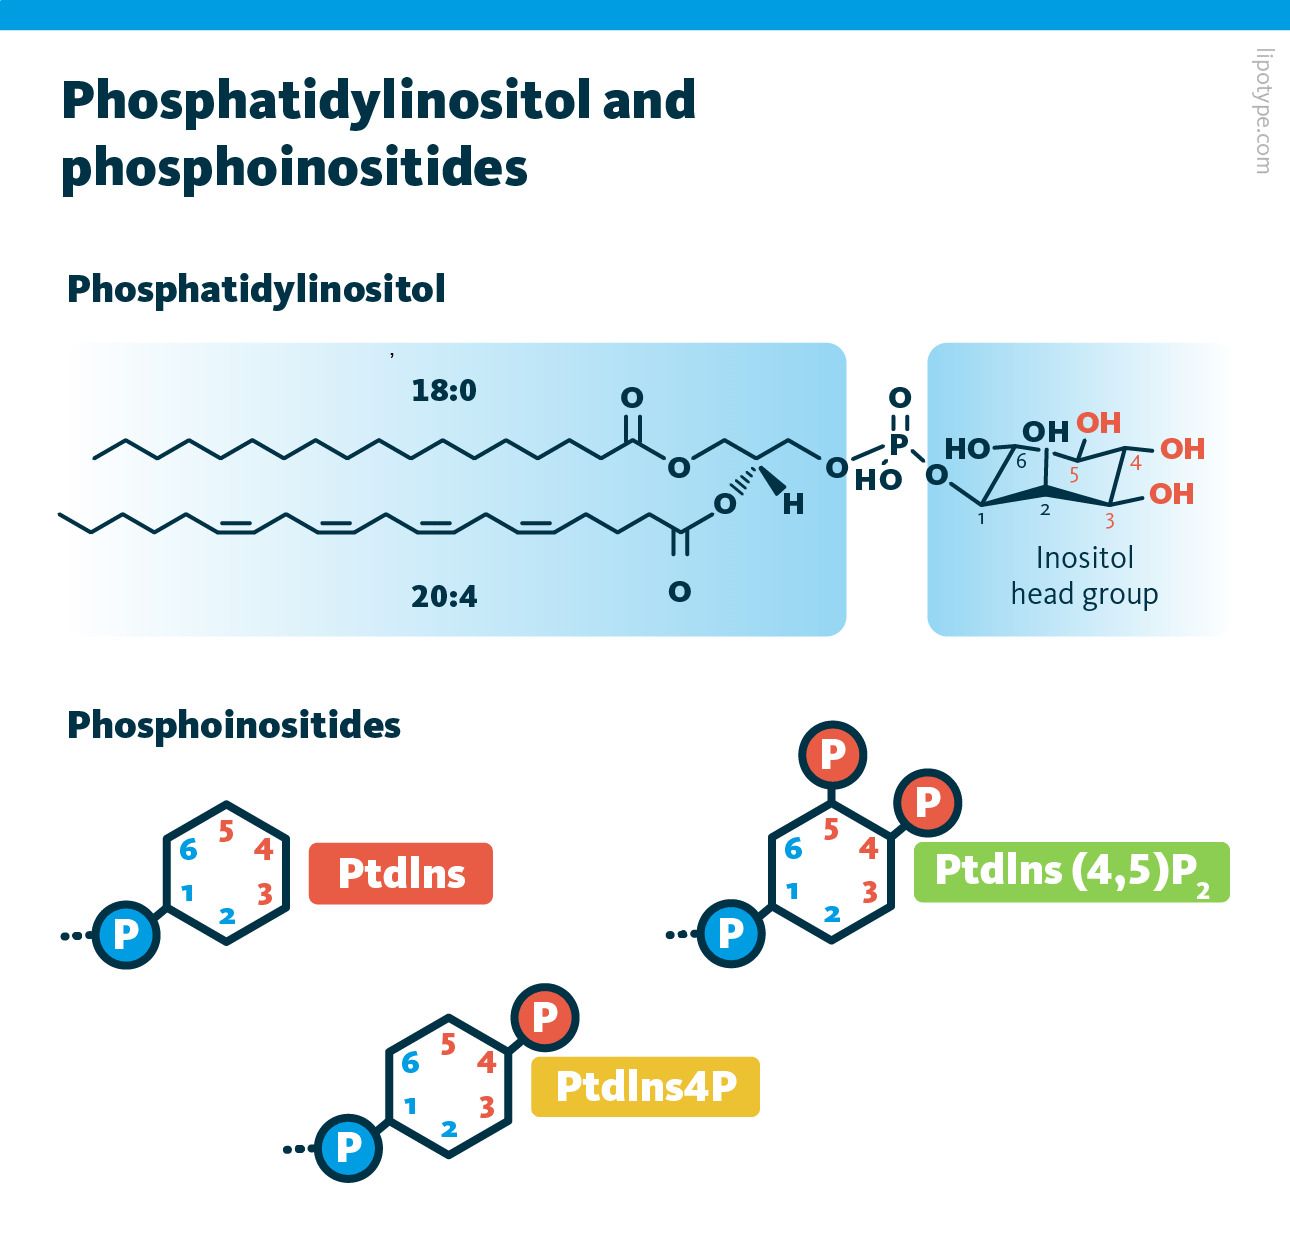 The structure of phosphatidylinositol and phosphoinositides. Left: the phosphatidylinositol chemical structure PI(18:0/20:4) with hydroxyl groups at positions 3, 4, and 5 of the myoinositol head group, which serve as targets for phosphorylation. Right: Phosphoinositides with phosphorylation sites marked in red, and phosphate groups denoted by a circled P.